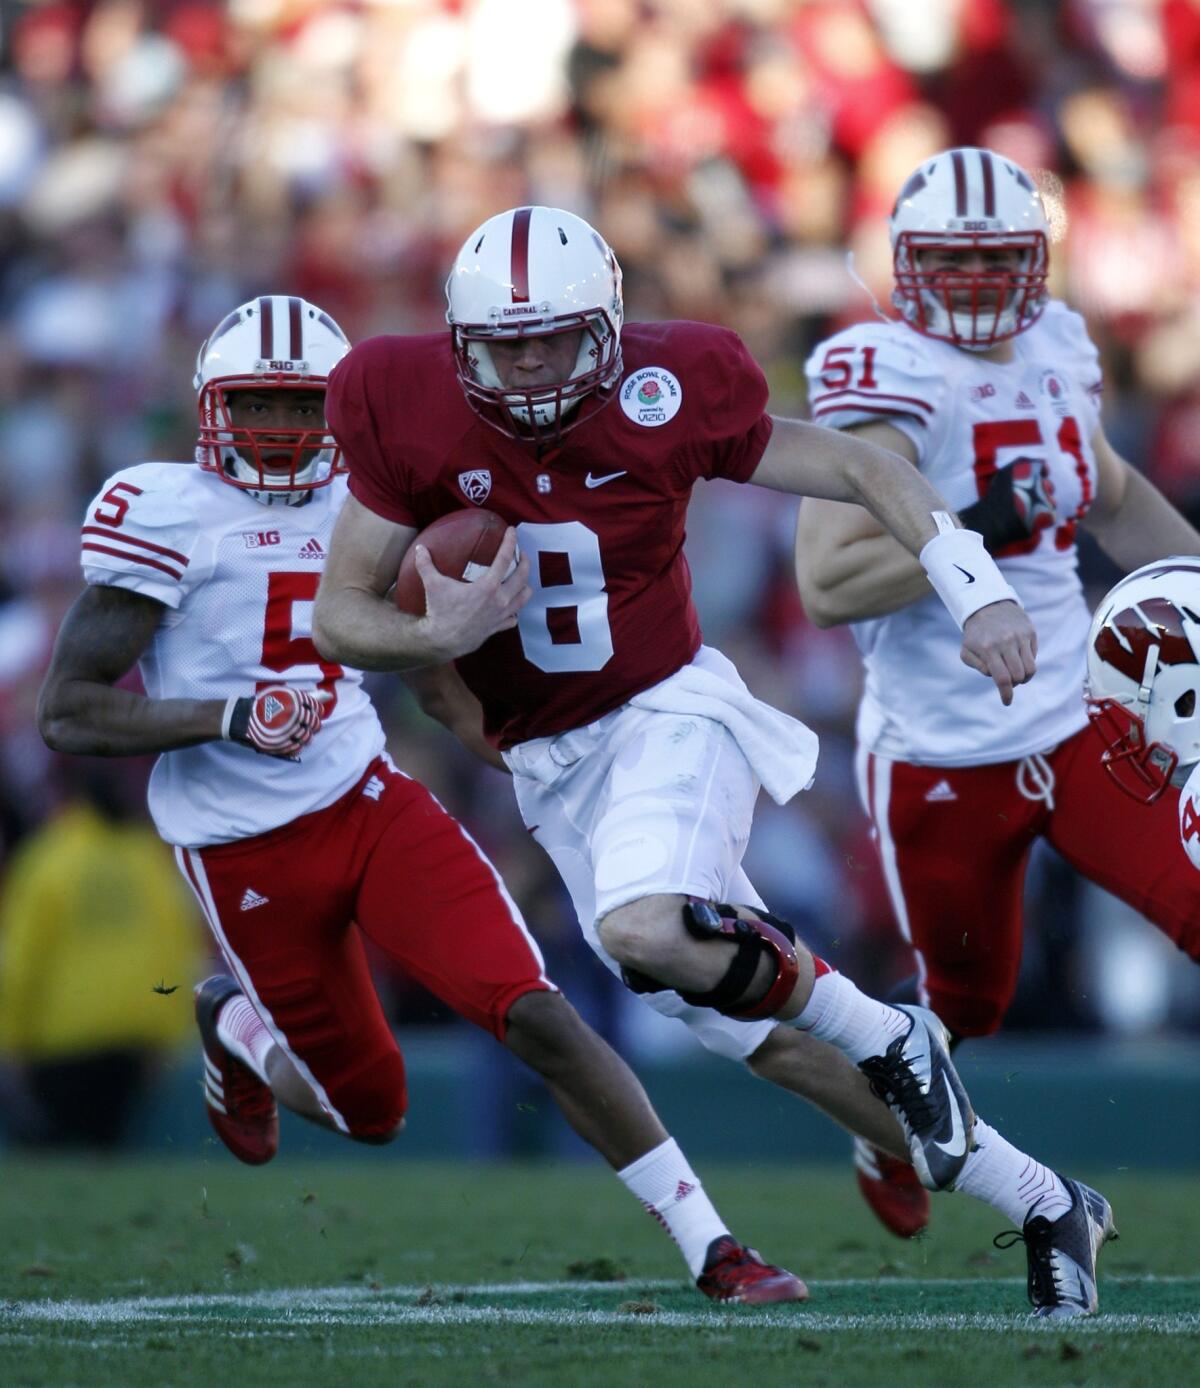 Stanford quarterback Kevin Hogan and the Cardinal look to get their national title hopes off to a strong start with a win over San Jose State on Saturday.